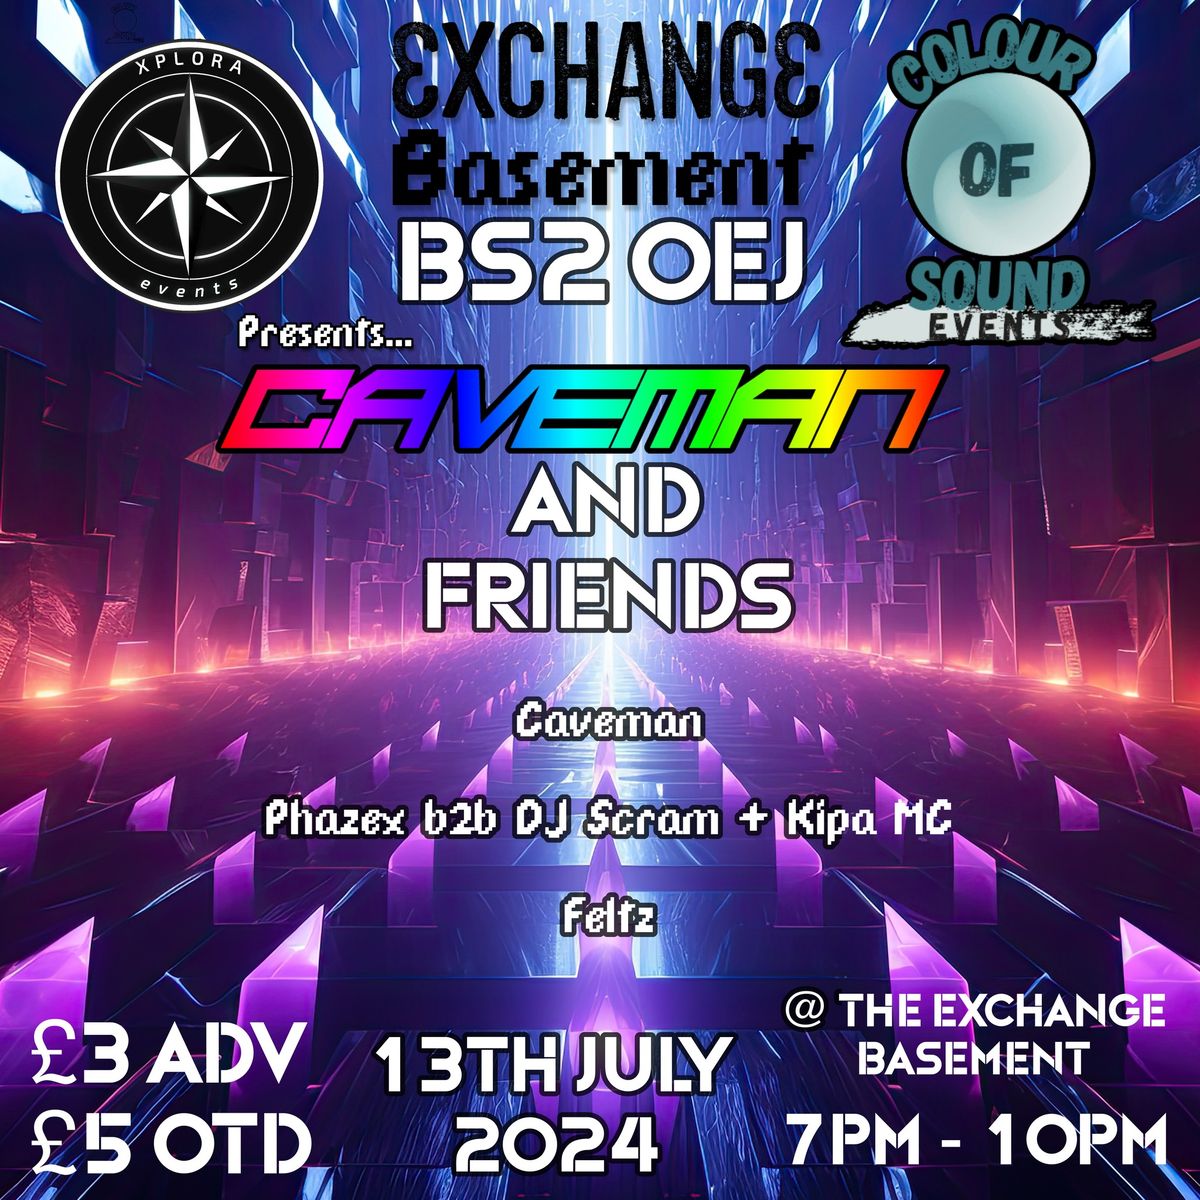 Xplora Events X Colour of Sound Presents Caveman and Friends in the Exchange basement